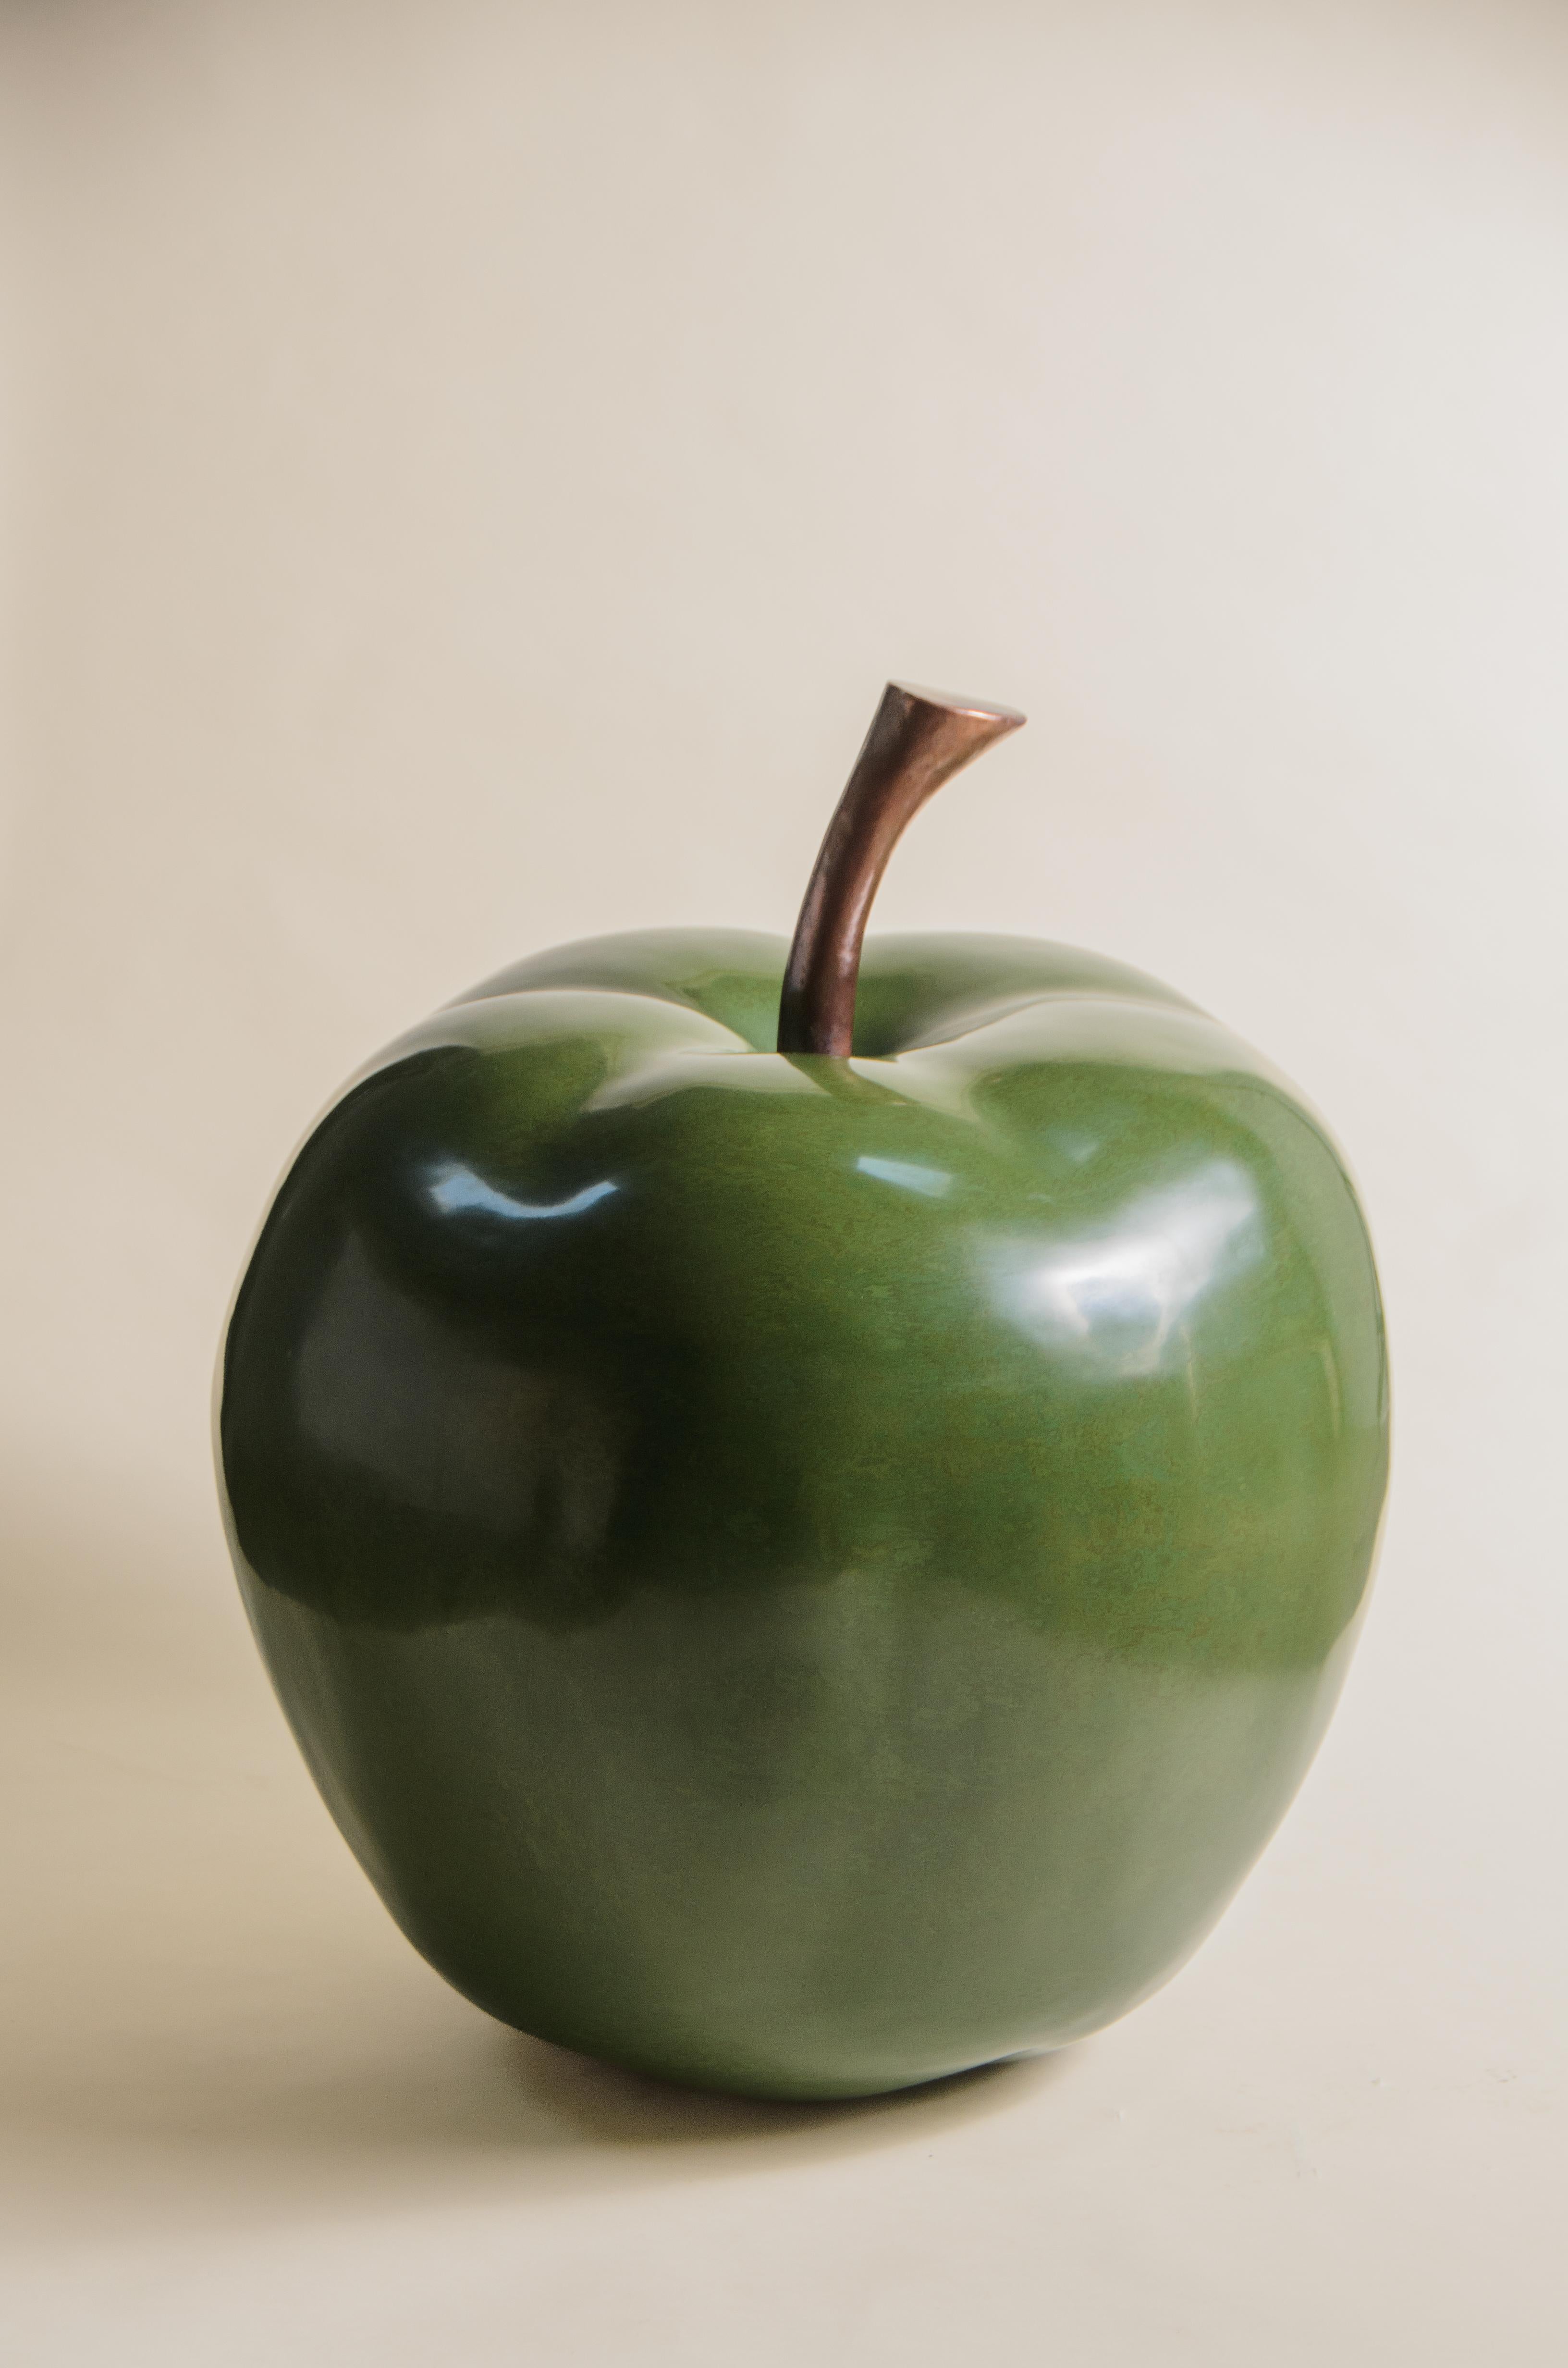 Lacquered Green Apple Lacquer Sculpture w/ Copper Stem by Robert Kuo, Limited Edition For Sale